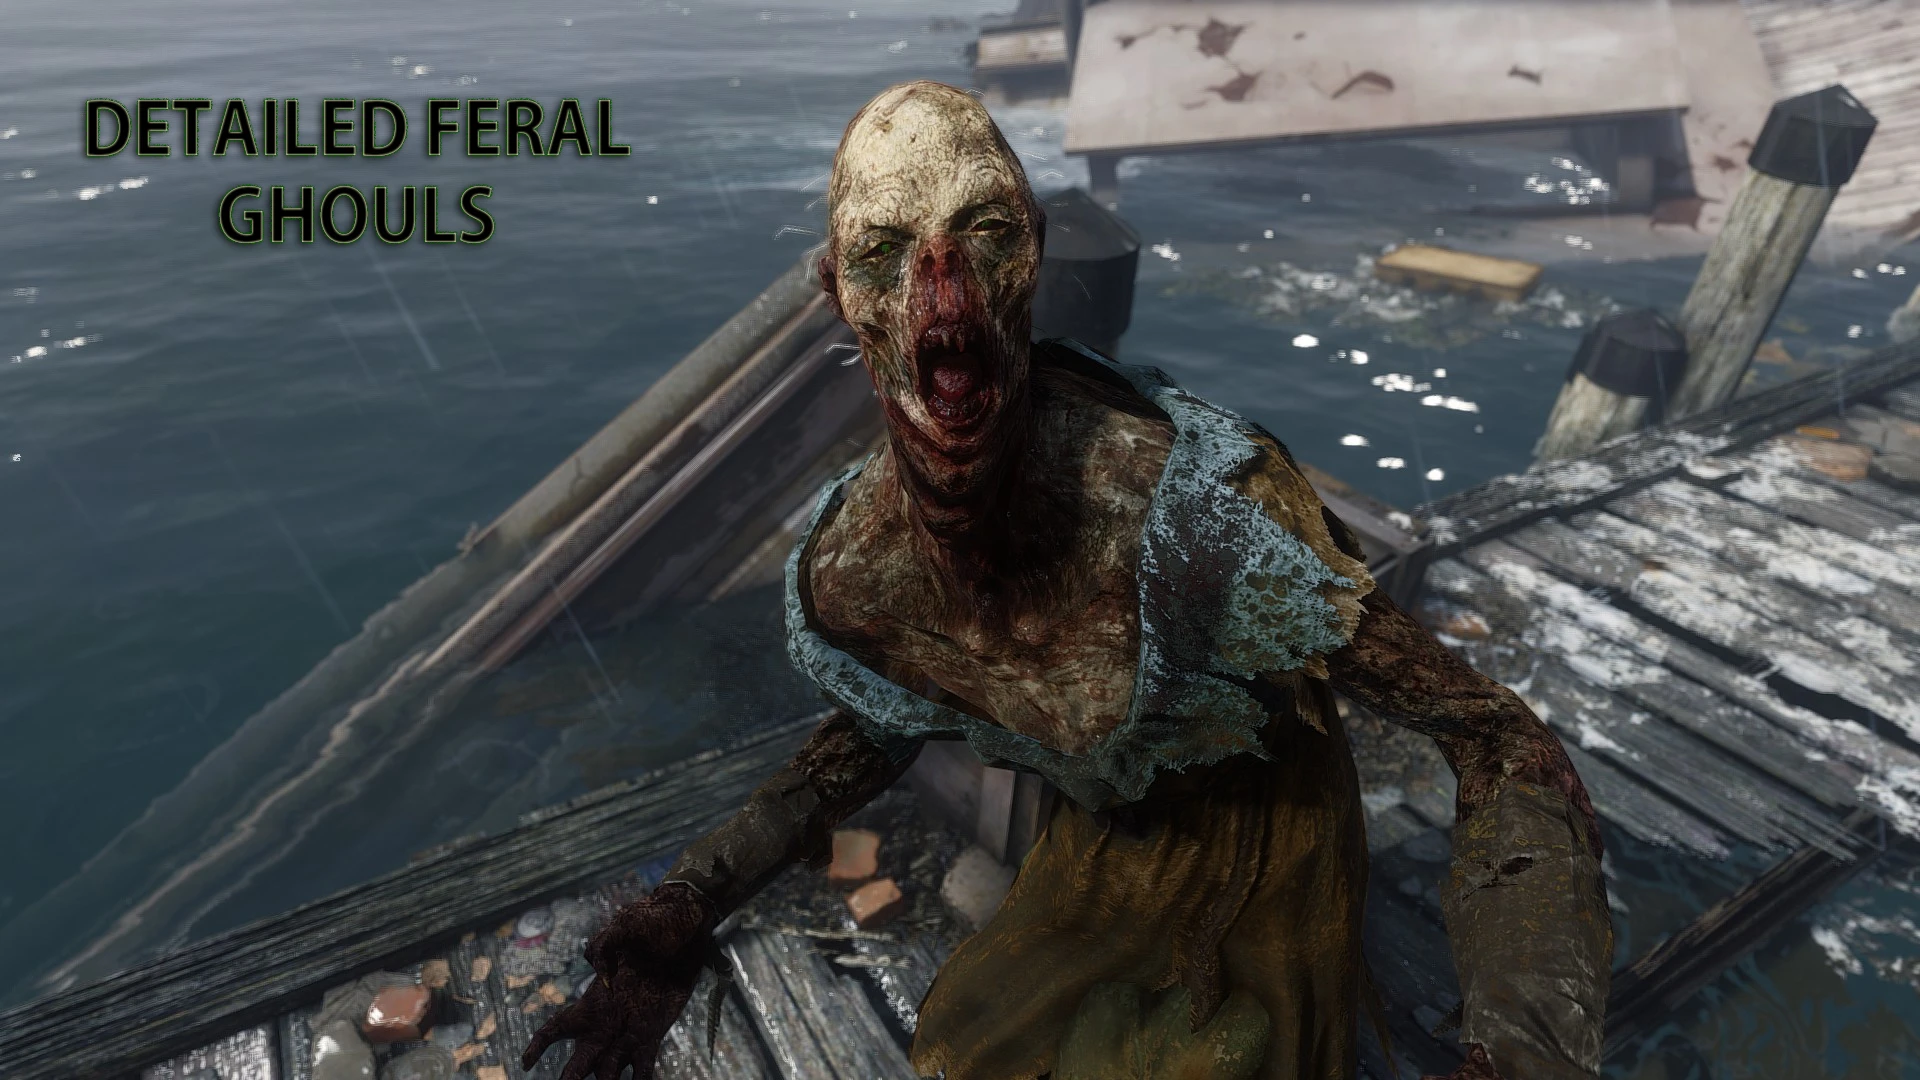 Feral ghoul from fallout 4 фото 29